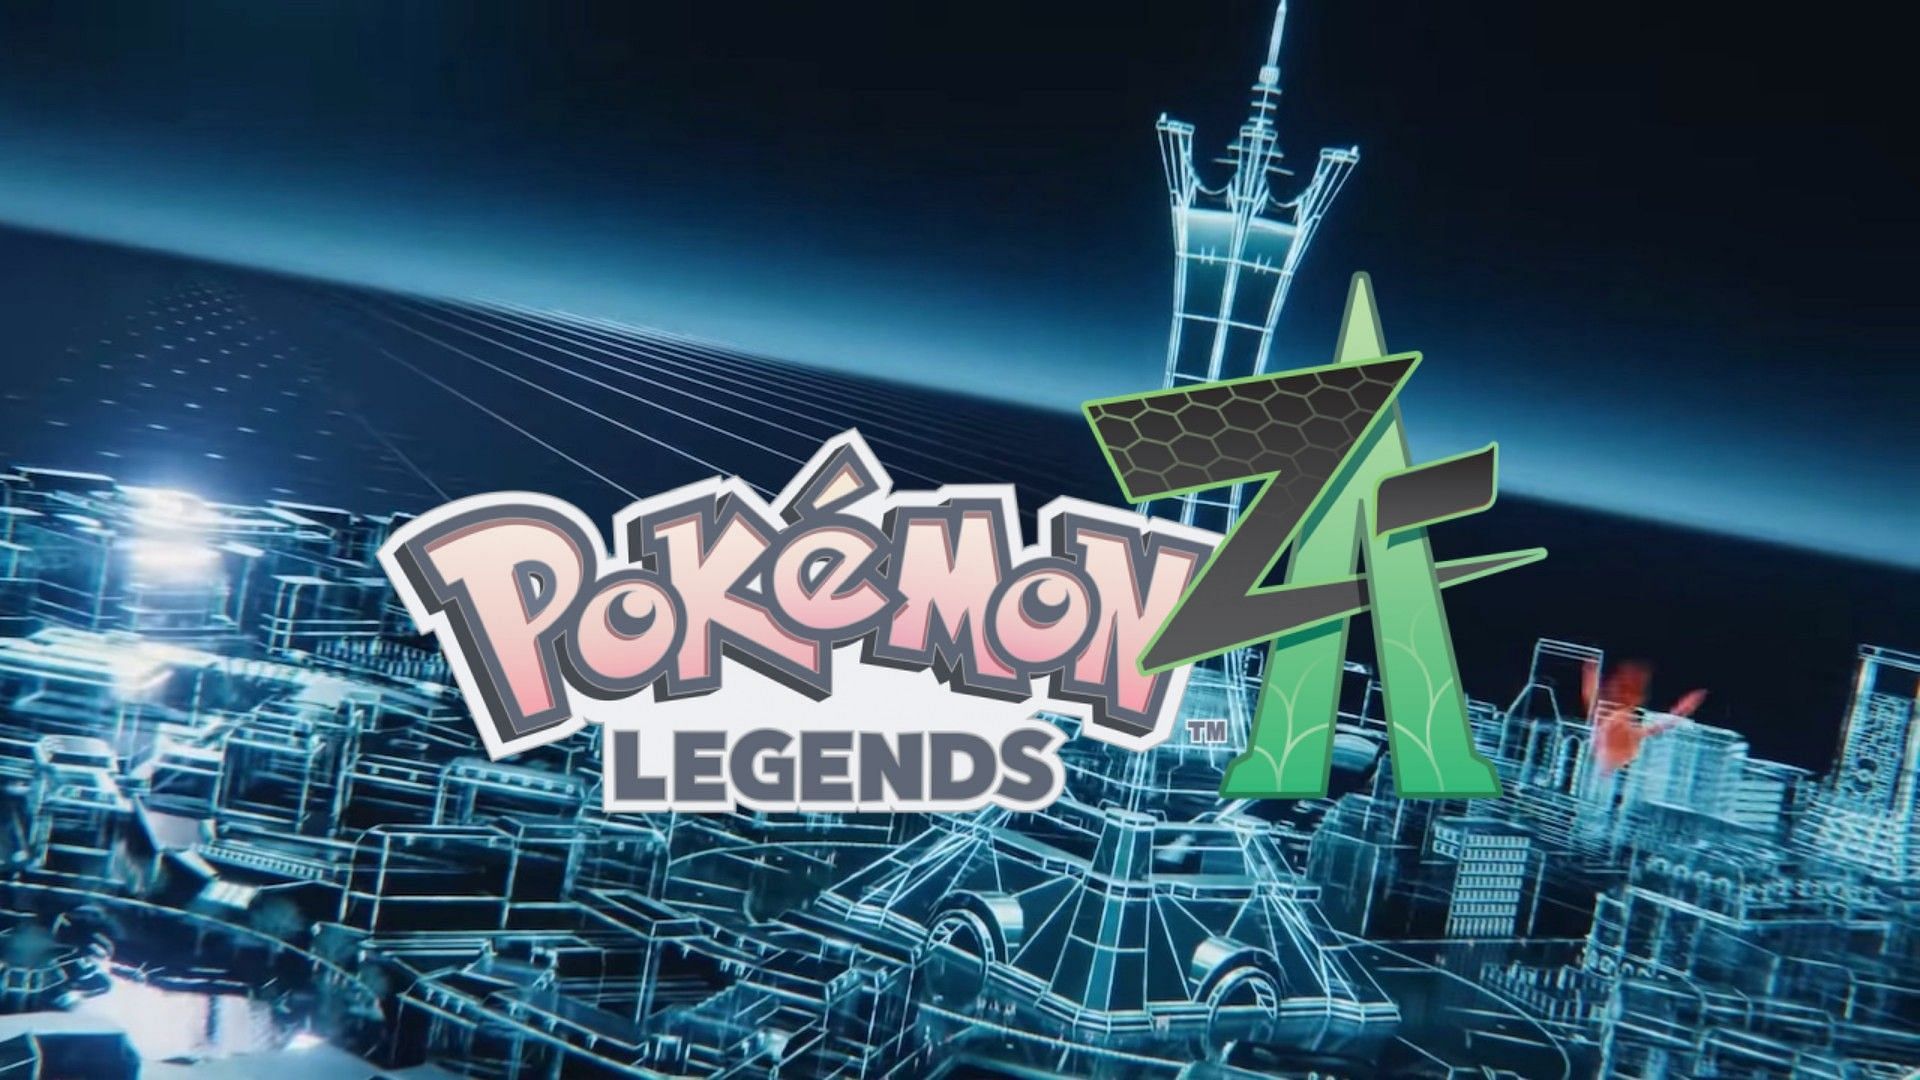 Official imagery for Pokemon Legends Z-A